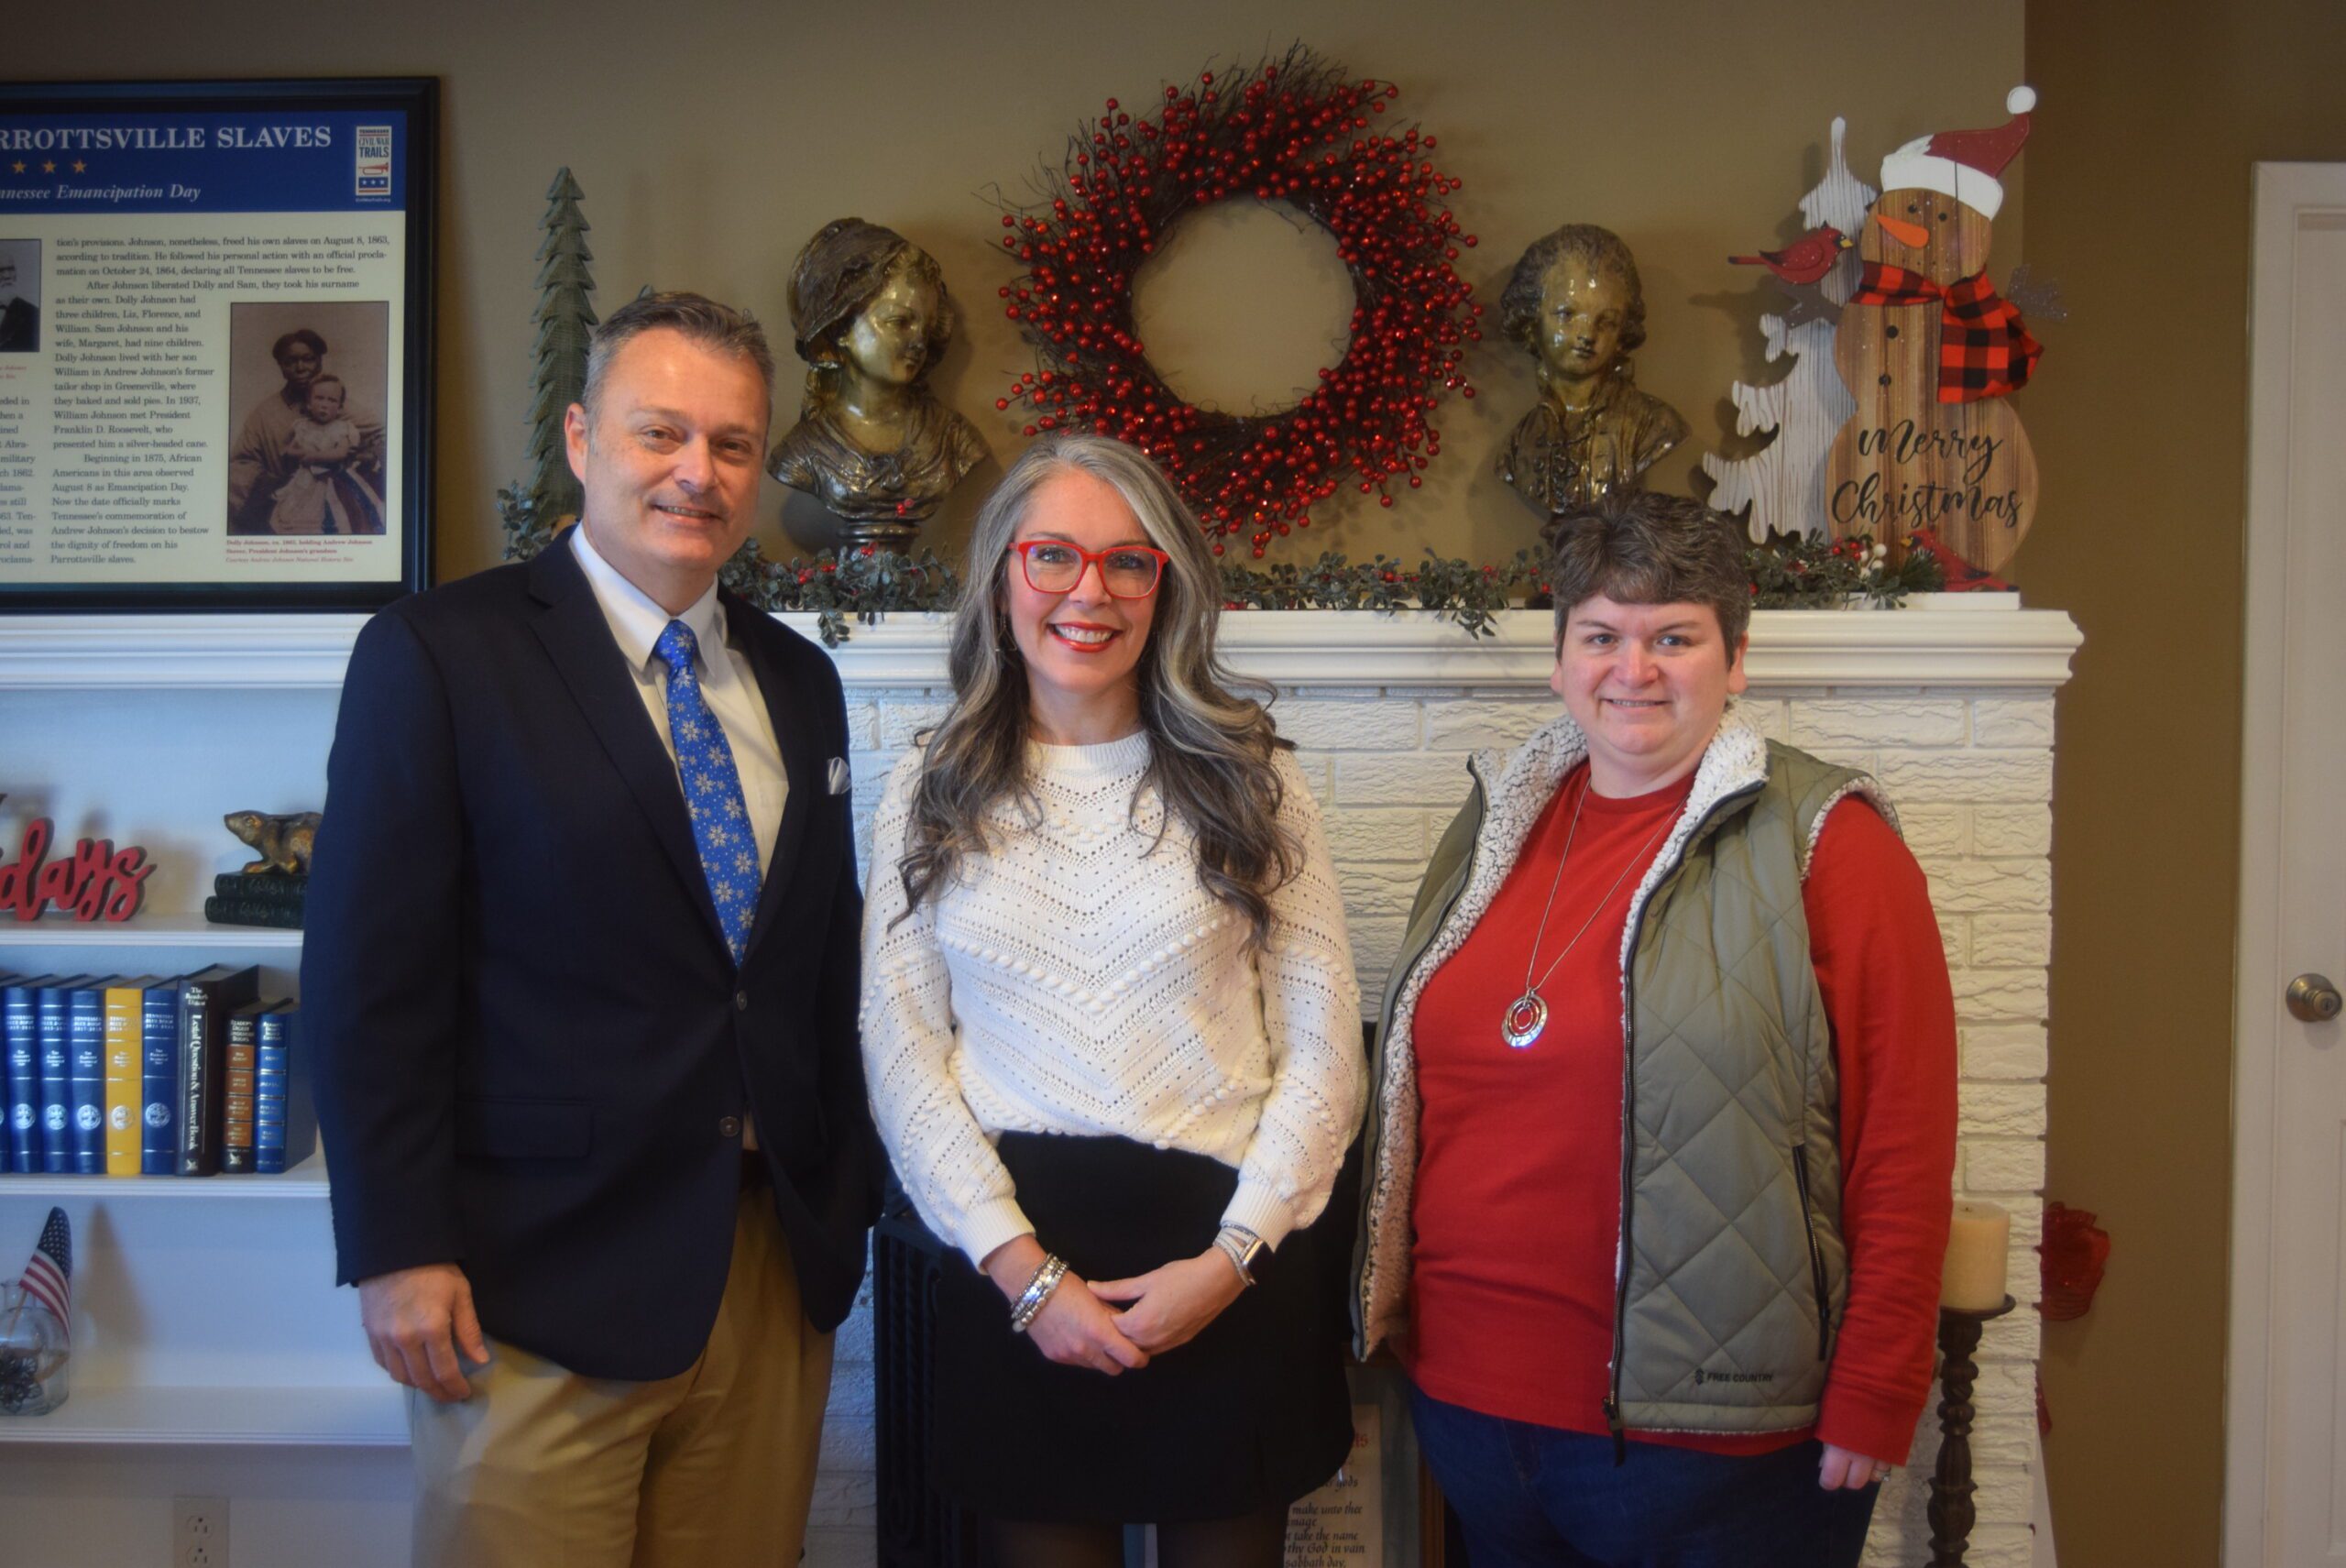 Left to right: Cocke County Mayor Rob Mathis, • Comcast Manager of Government & Regulatory Affairs Courtney Durrett, Parrottsville City Recorder Sharon Peters